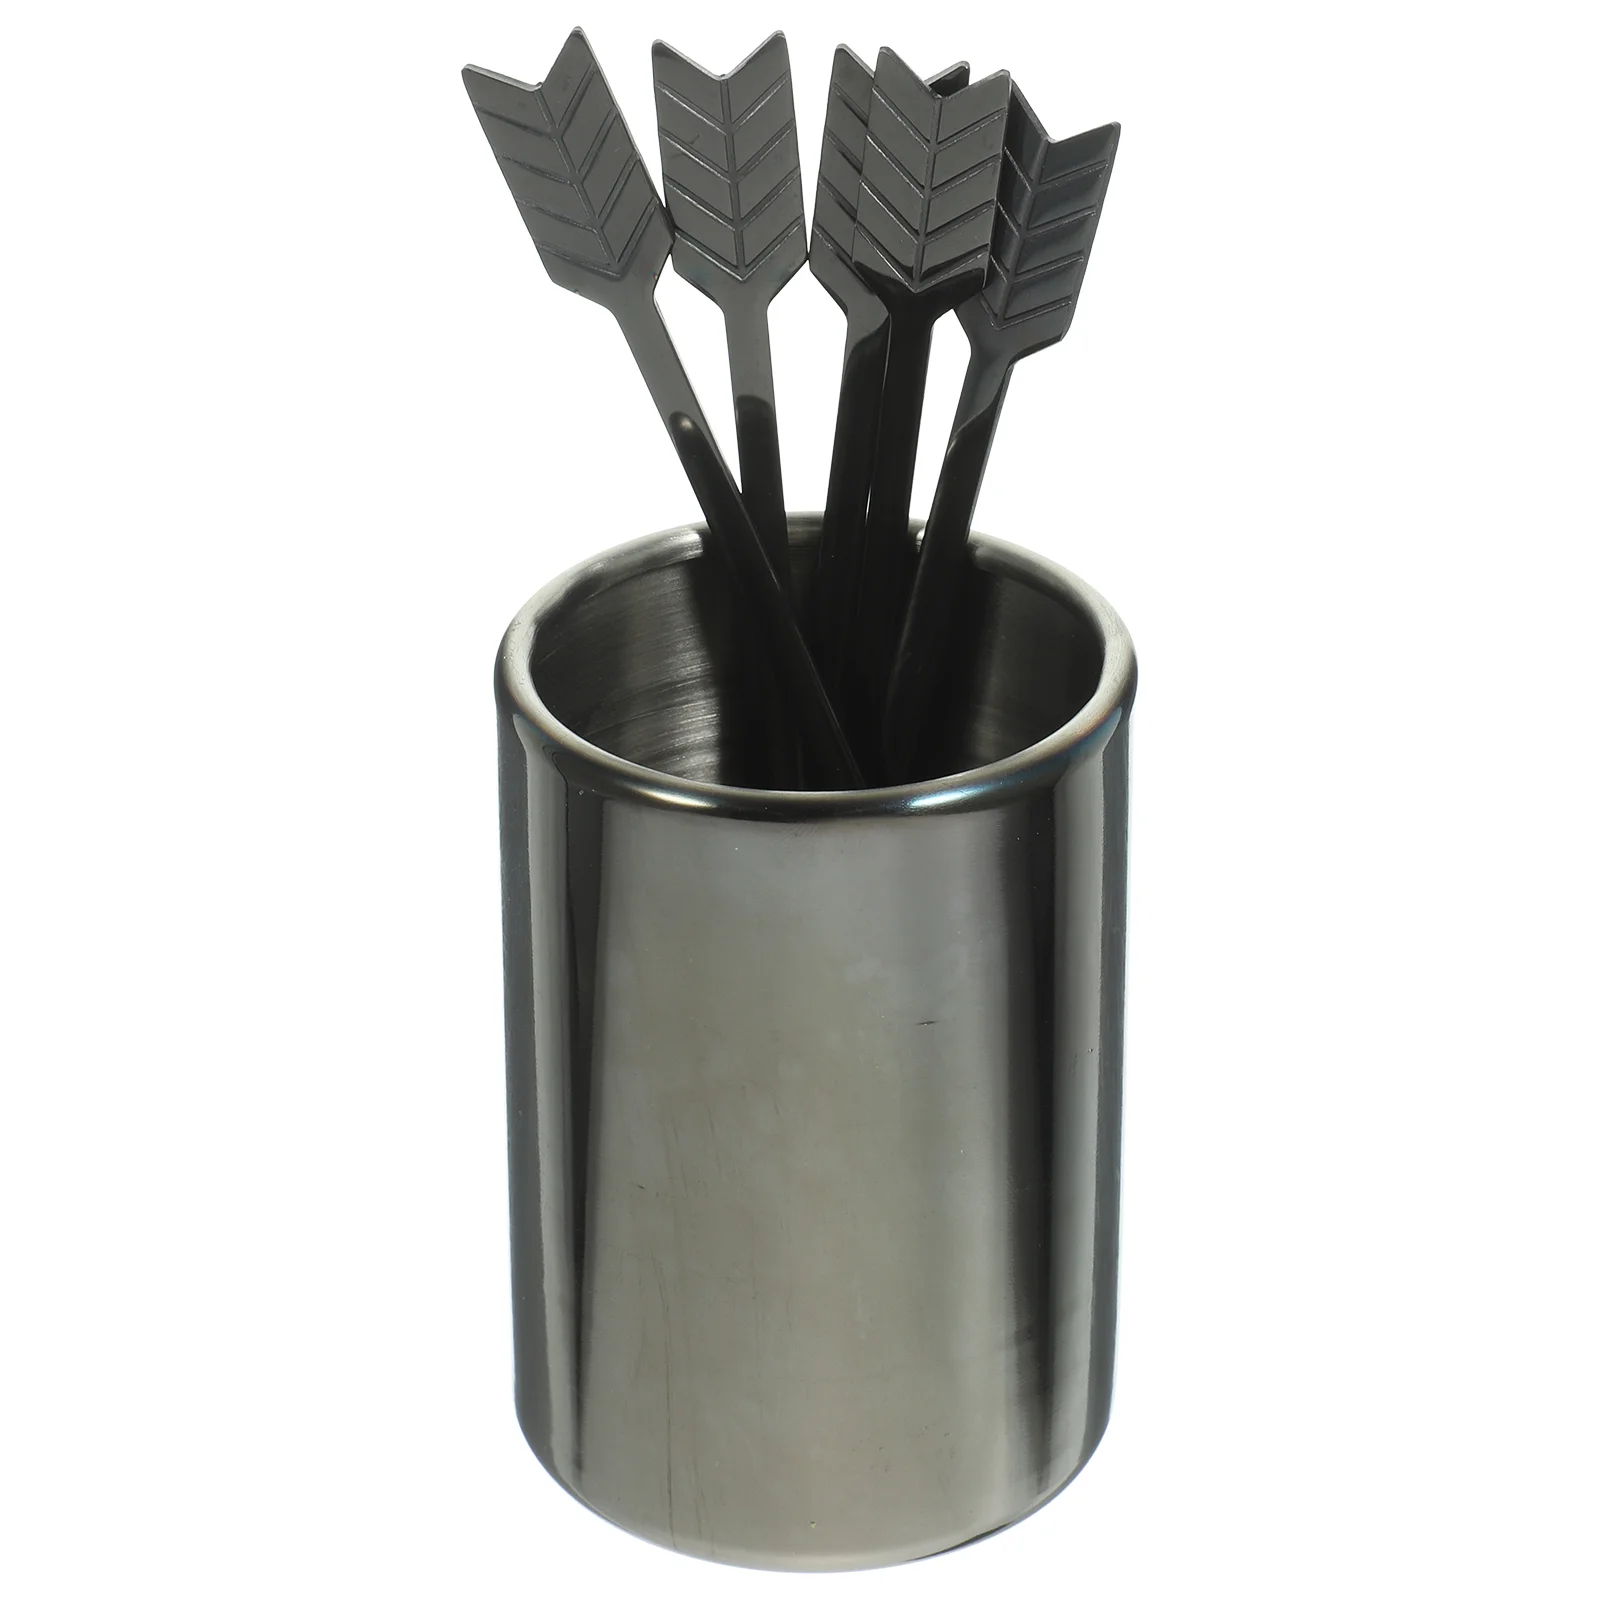 

Tooth Picks Cocktail Sticks Reusable Coffee Stirrers Toothpicks Quiver Stainless Steel Cocktails Appetizers 304 Holder Swizzle